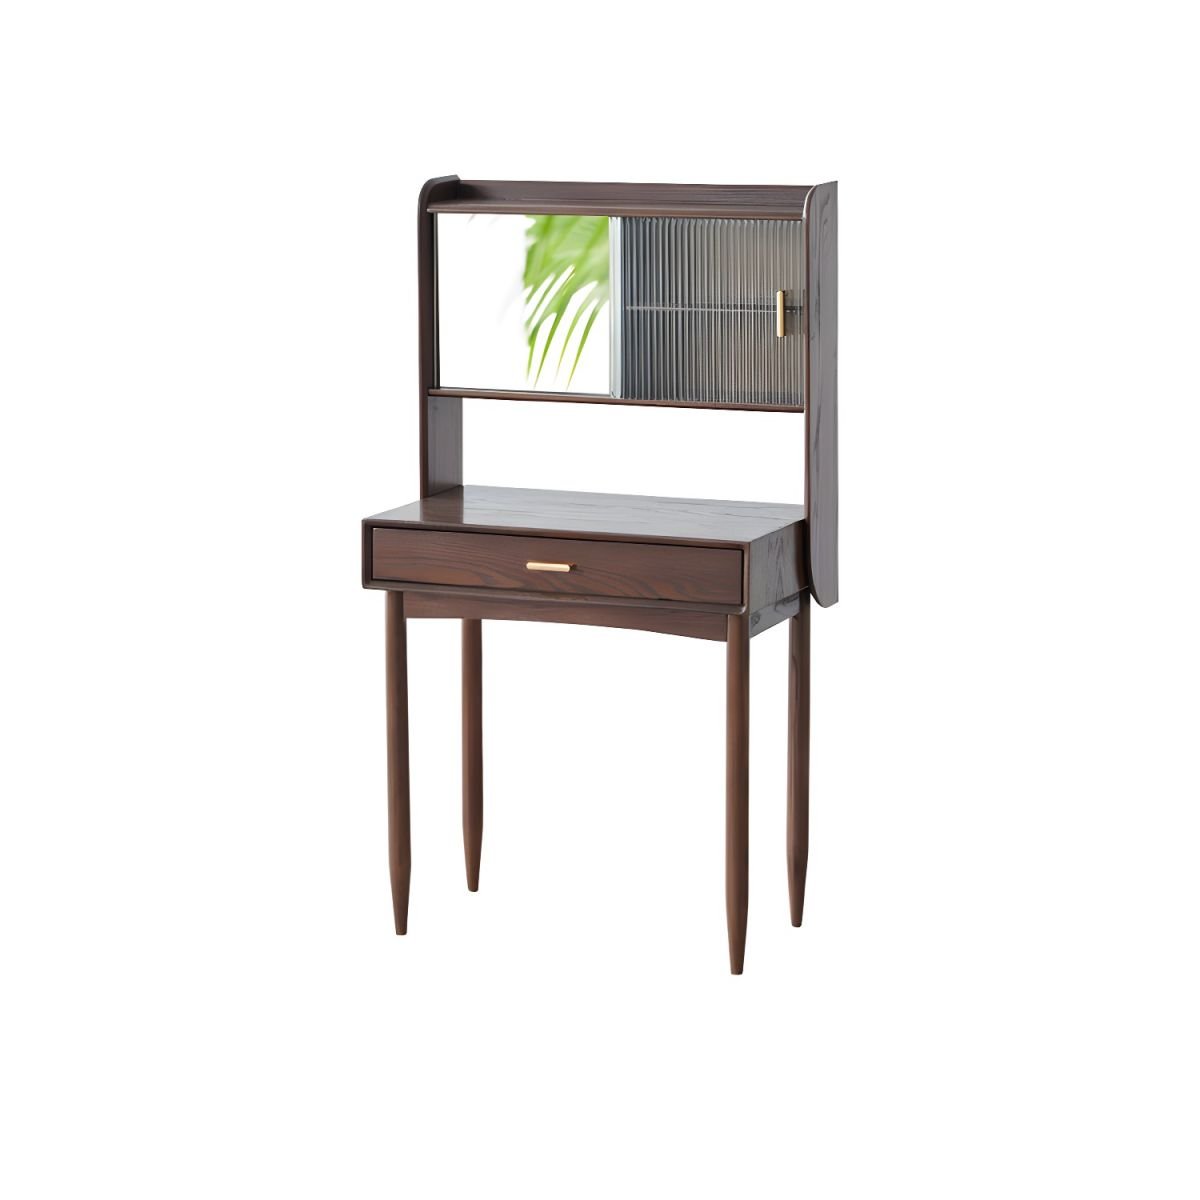 Modern Small Dressing Table Cocoa Timber with Adjustable Mirror, Makeup Vanity & Mirror